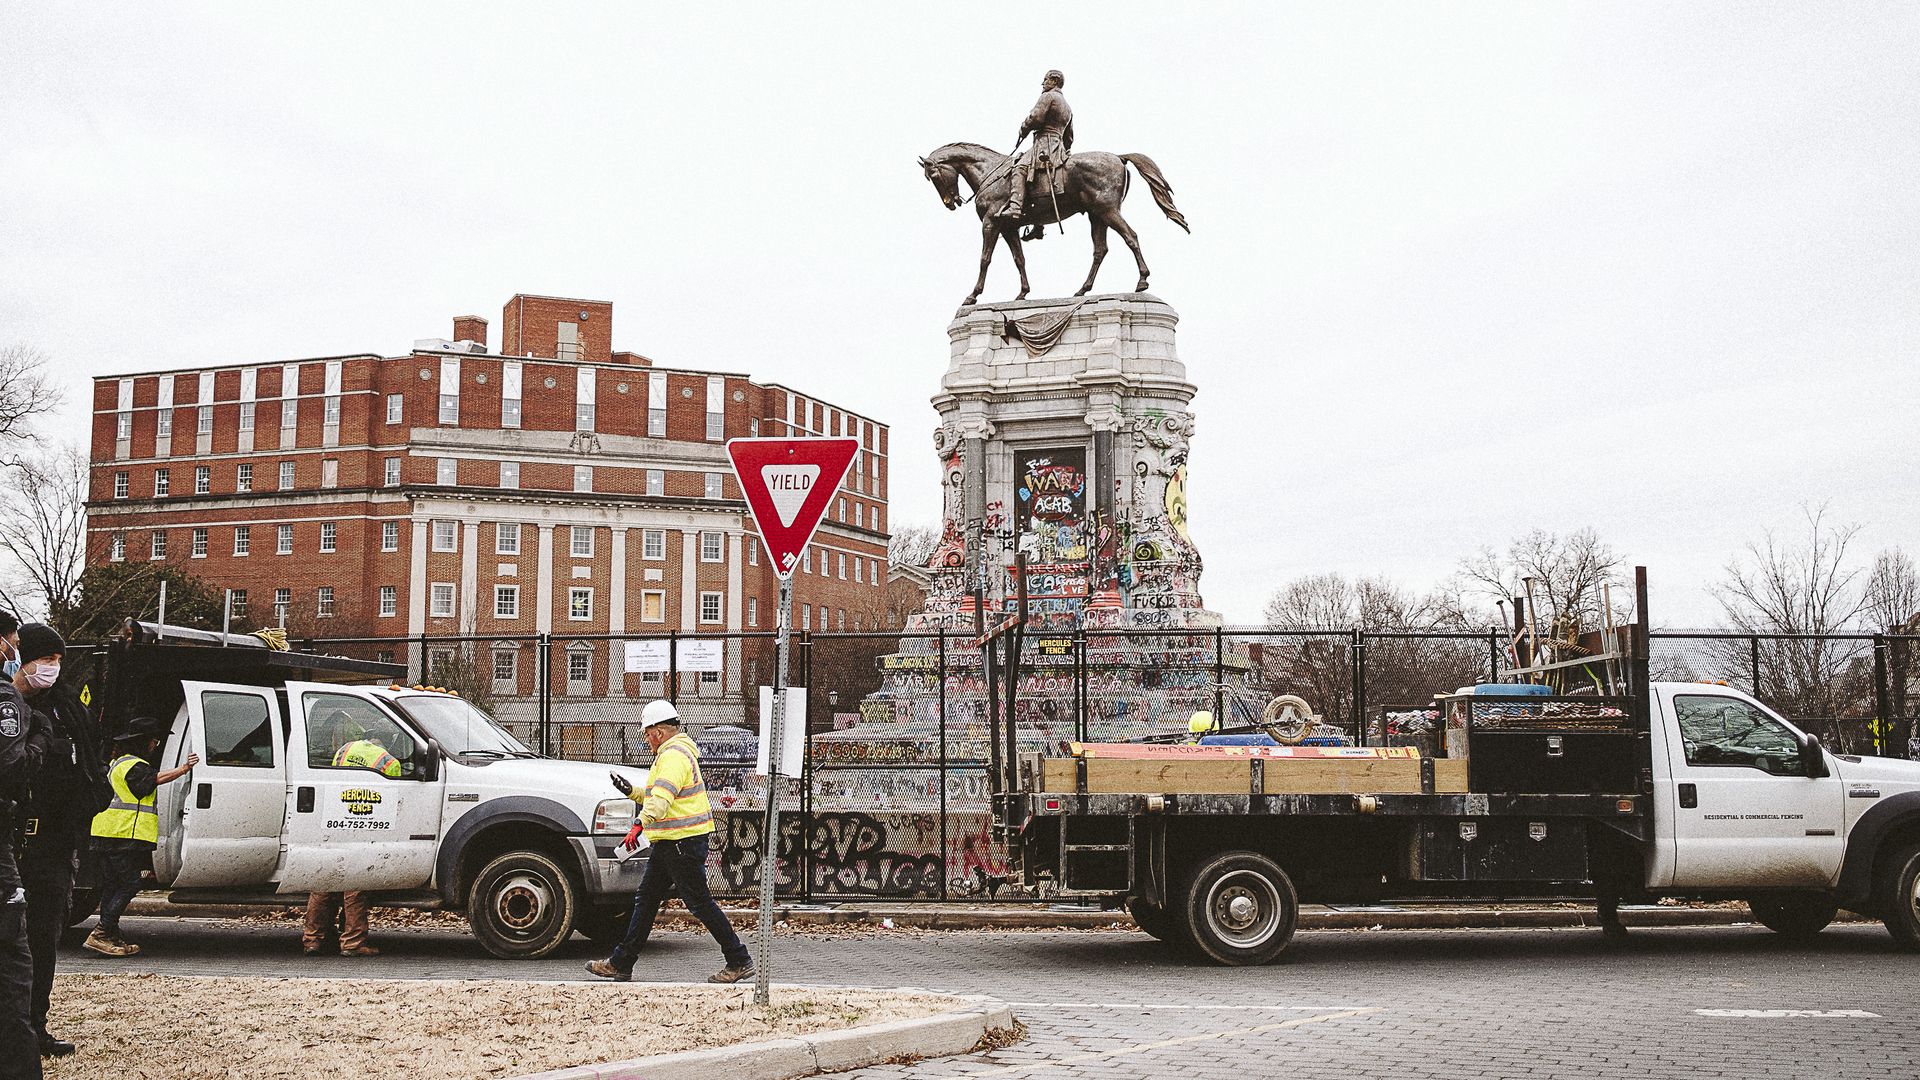 Workers install an 8-foot fence around the Robert E. Lee monument on January 25, 2021 in Richmond, Virginia. 